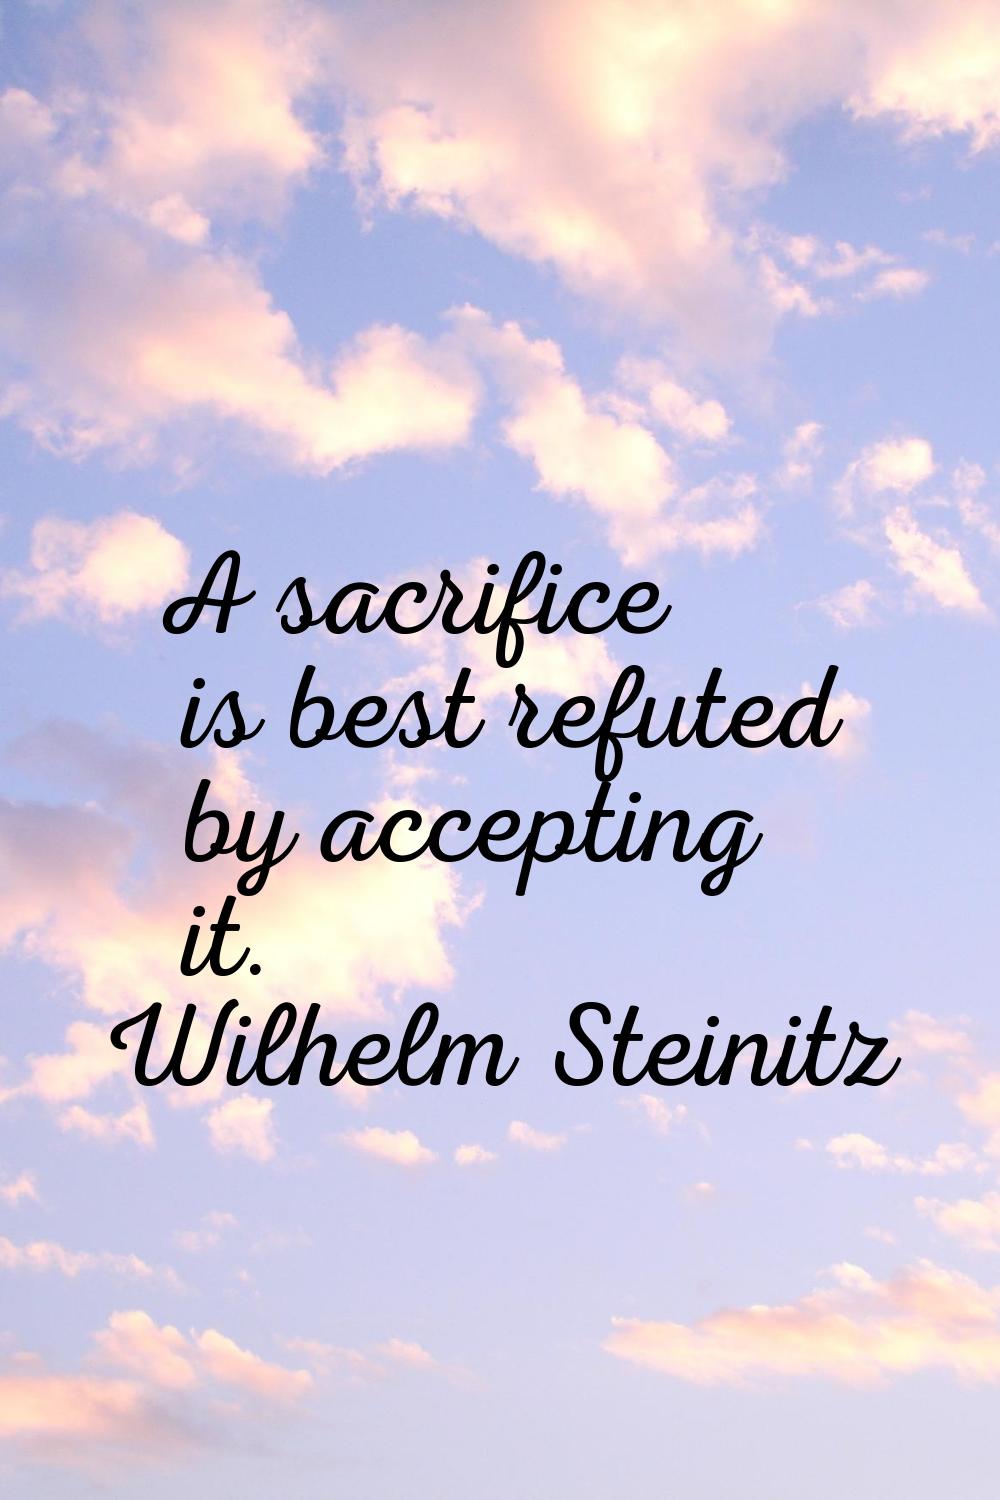 A sacrifice is best refuted by accepting it.